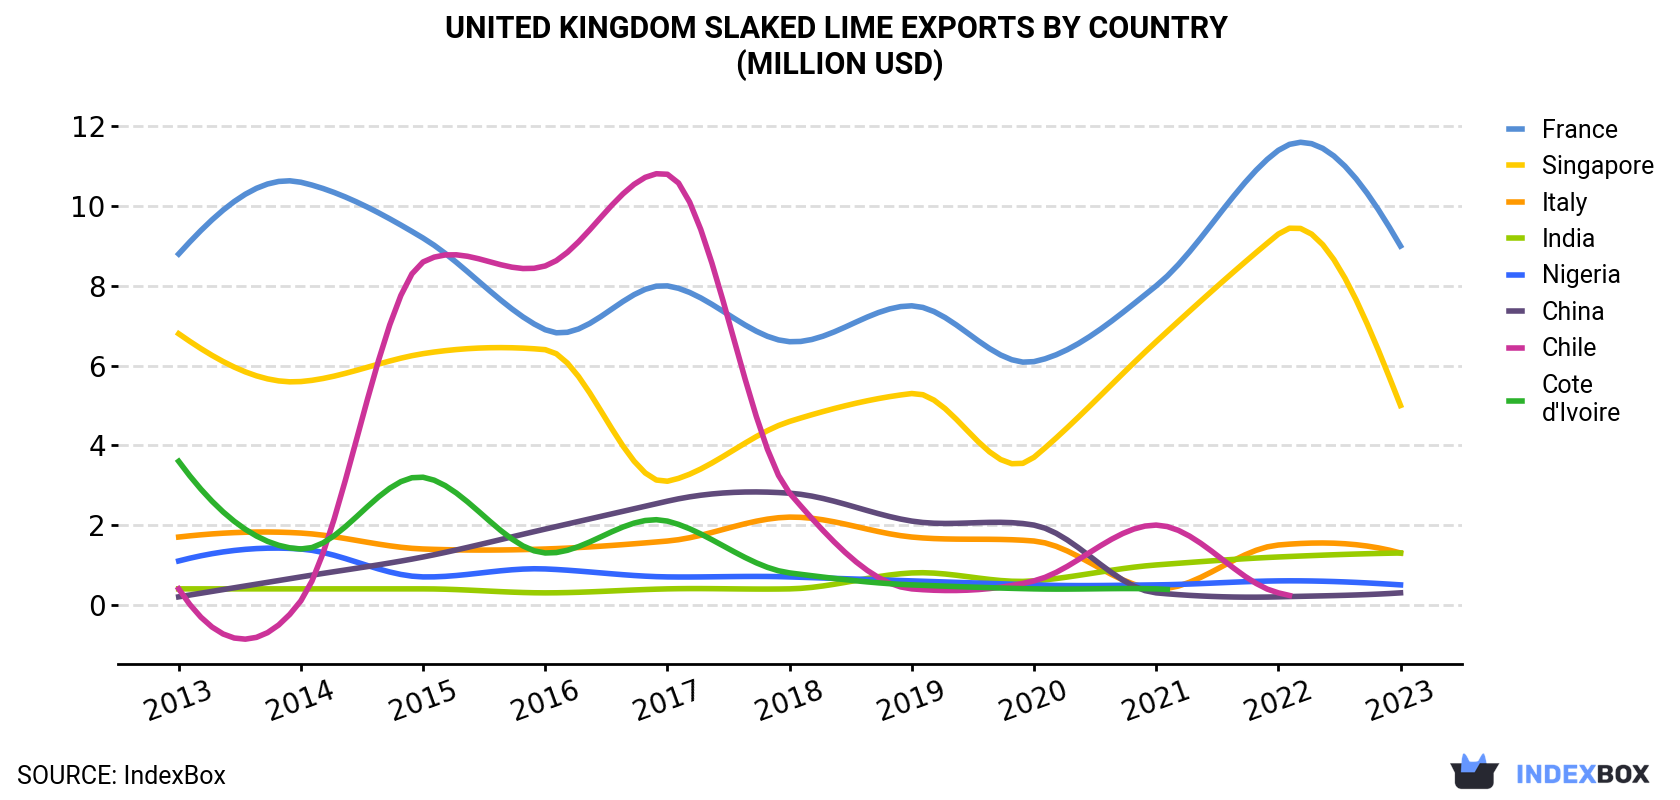 United Kingdom Slaked lime Exports By Country (Million USD)